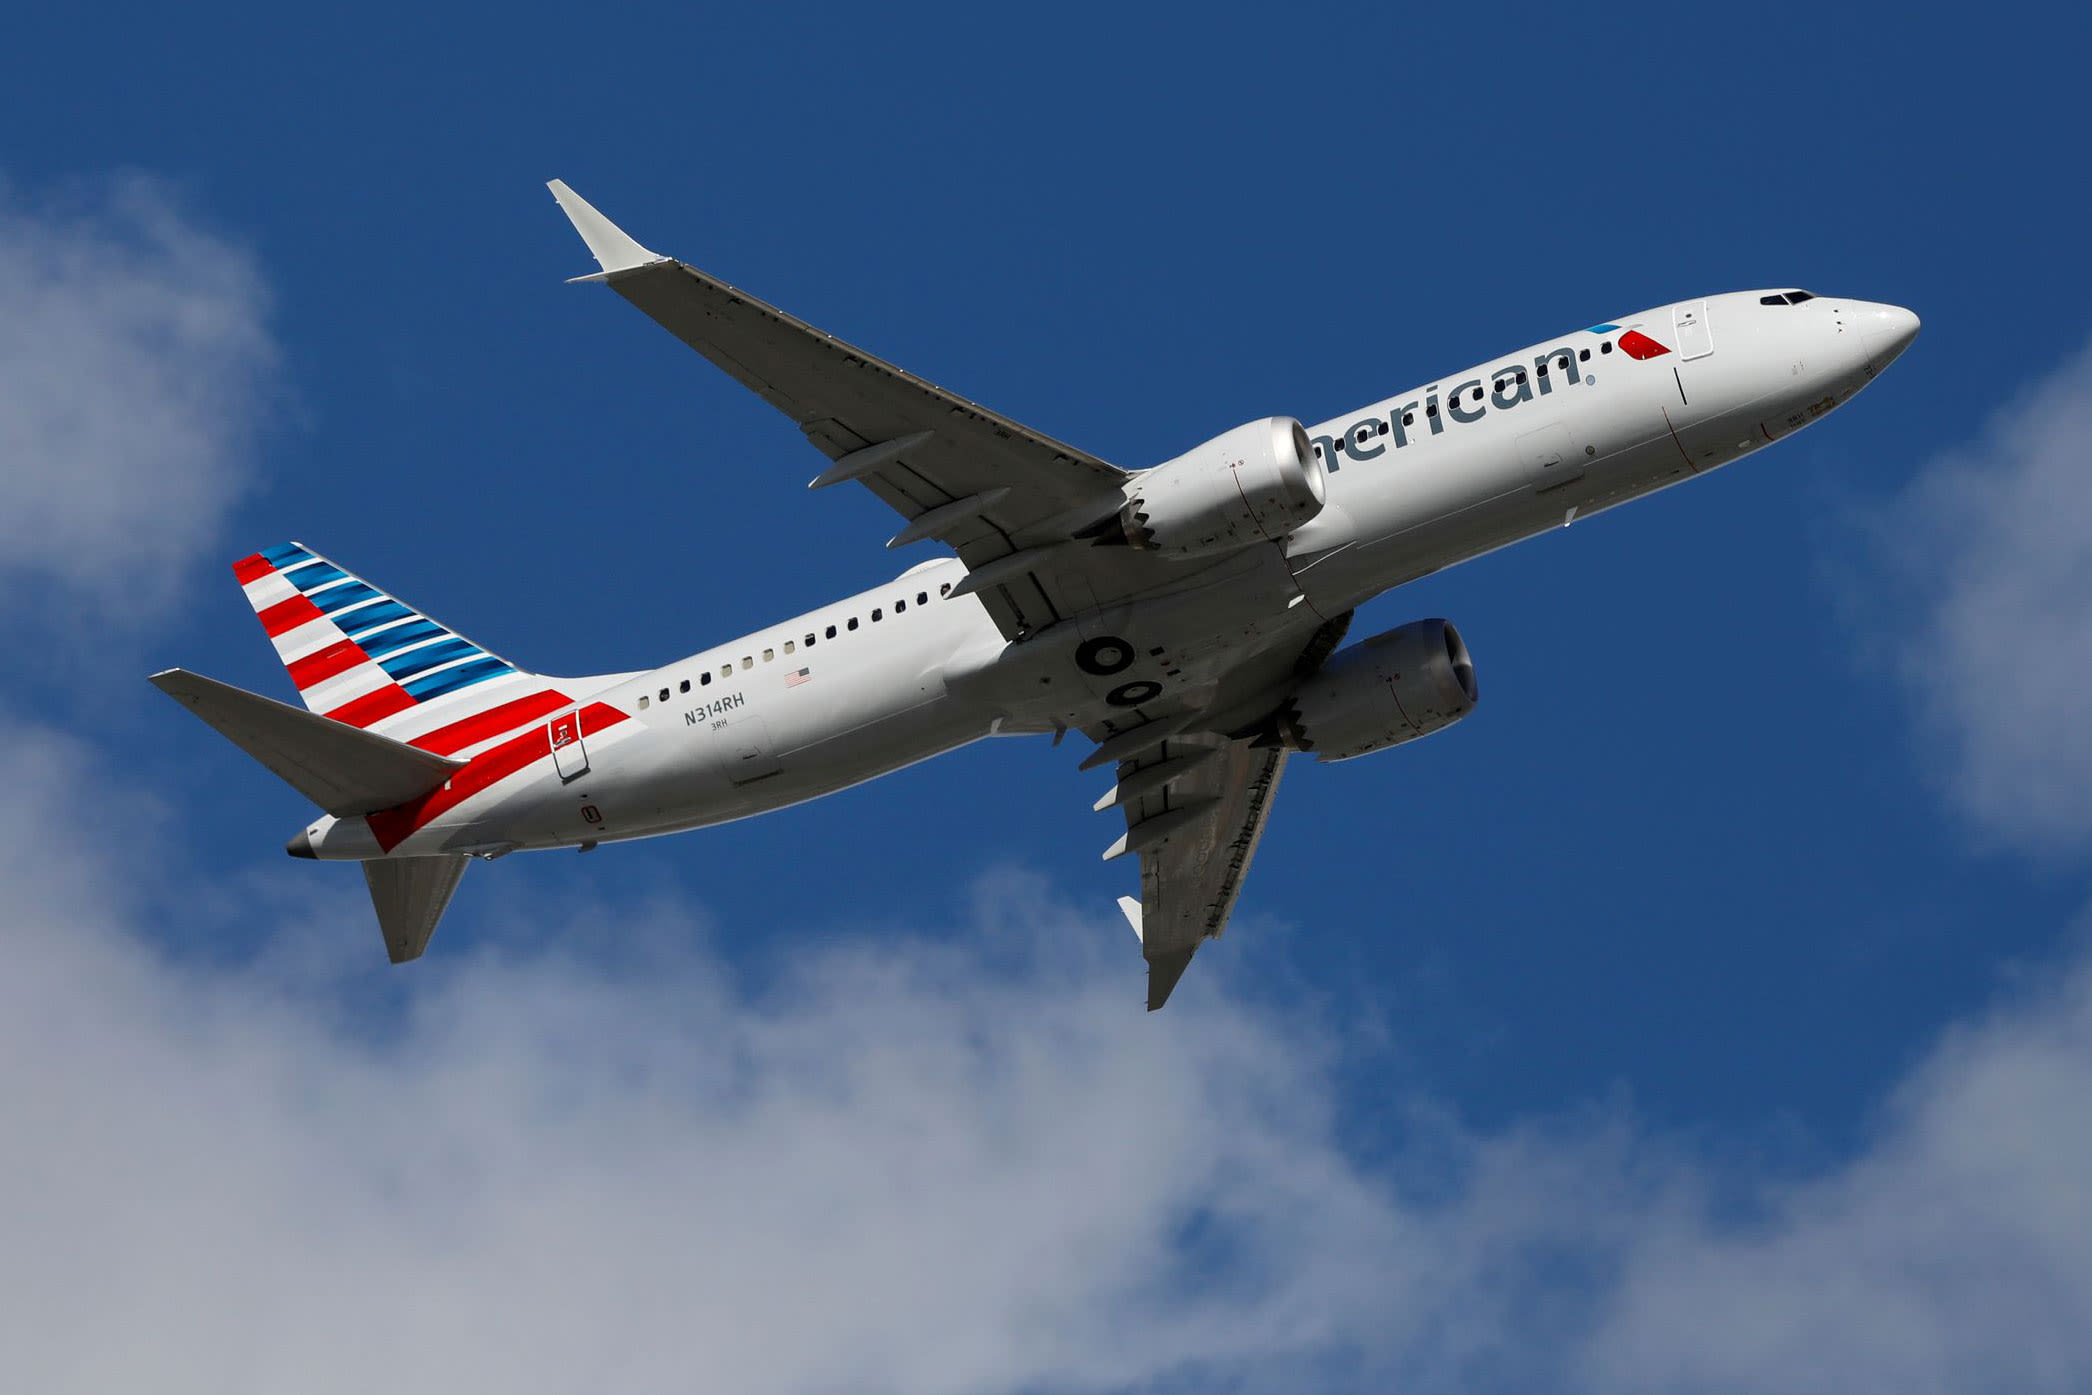 American Airlines sees capacity cuts through February as Covid cases increase